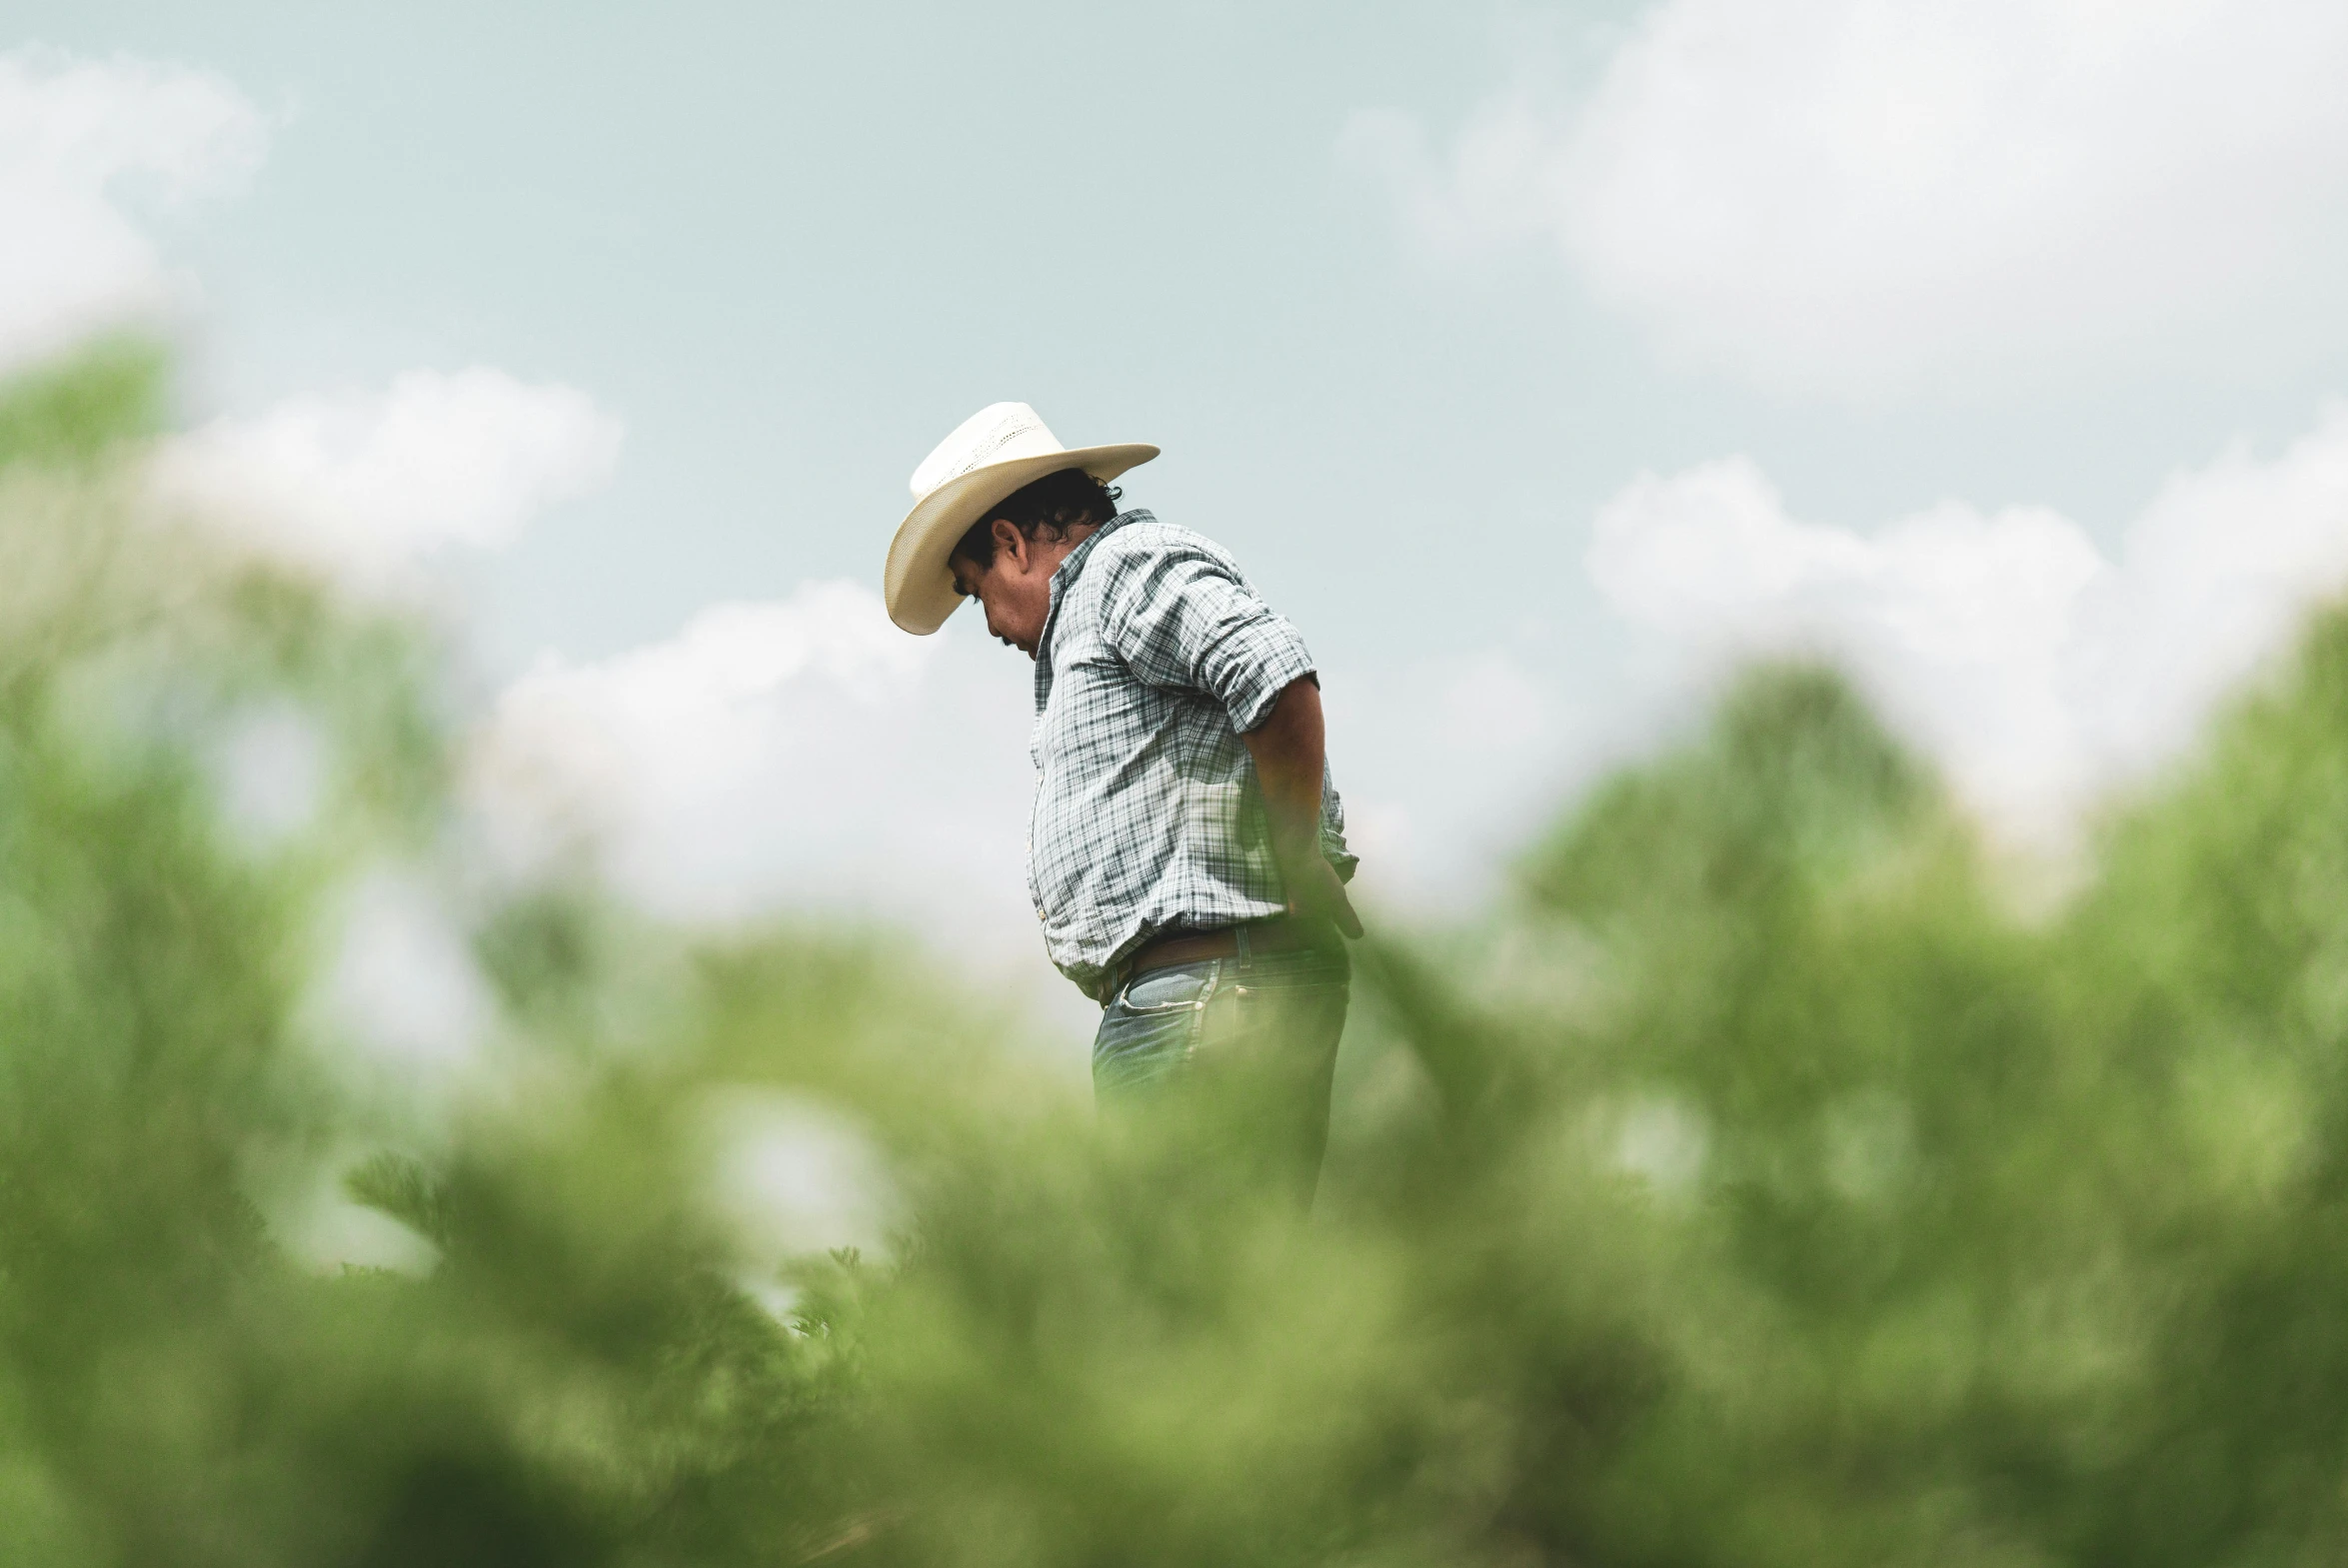 the man is standing in the field wearing a straw hat